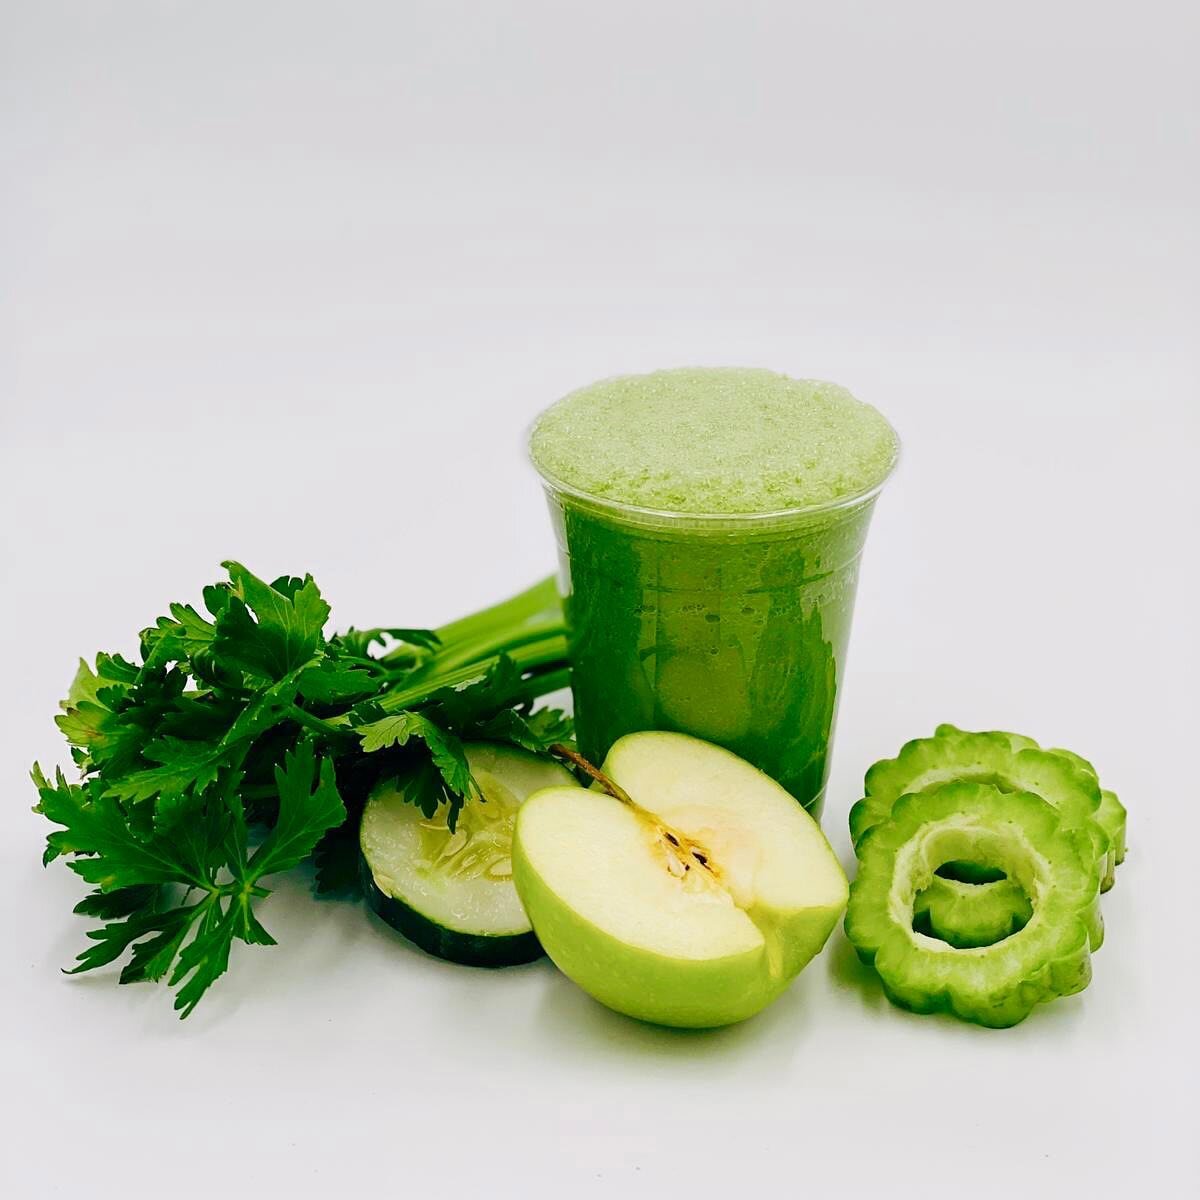 All greens blend into a cup. Intimidated by the bitterness from the bitter melon? No worries - the freshness from the cucumber and the sweetness from the apple are here to help you out! #rejuvenateyourskin #nourishyourbody #applecucumberjuice #freshj